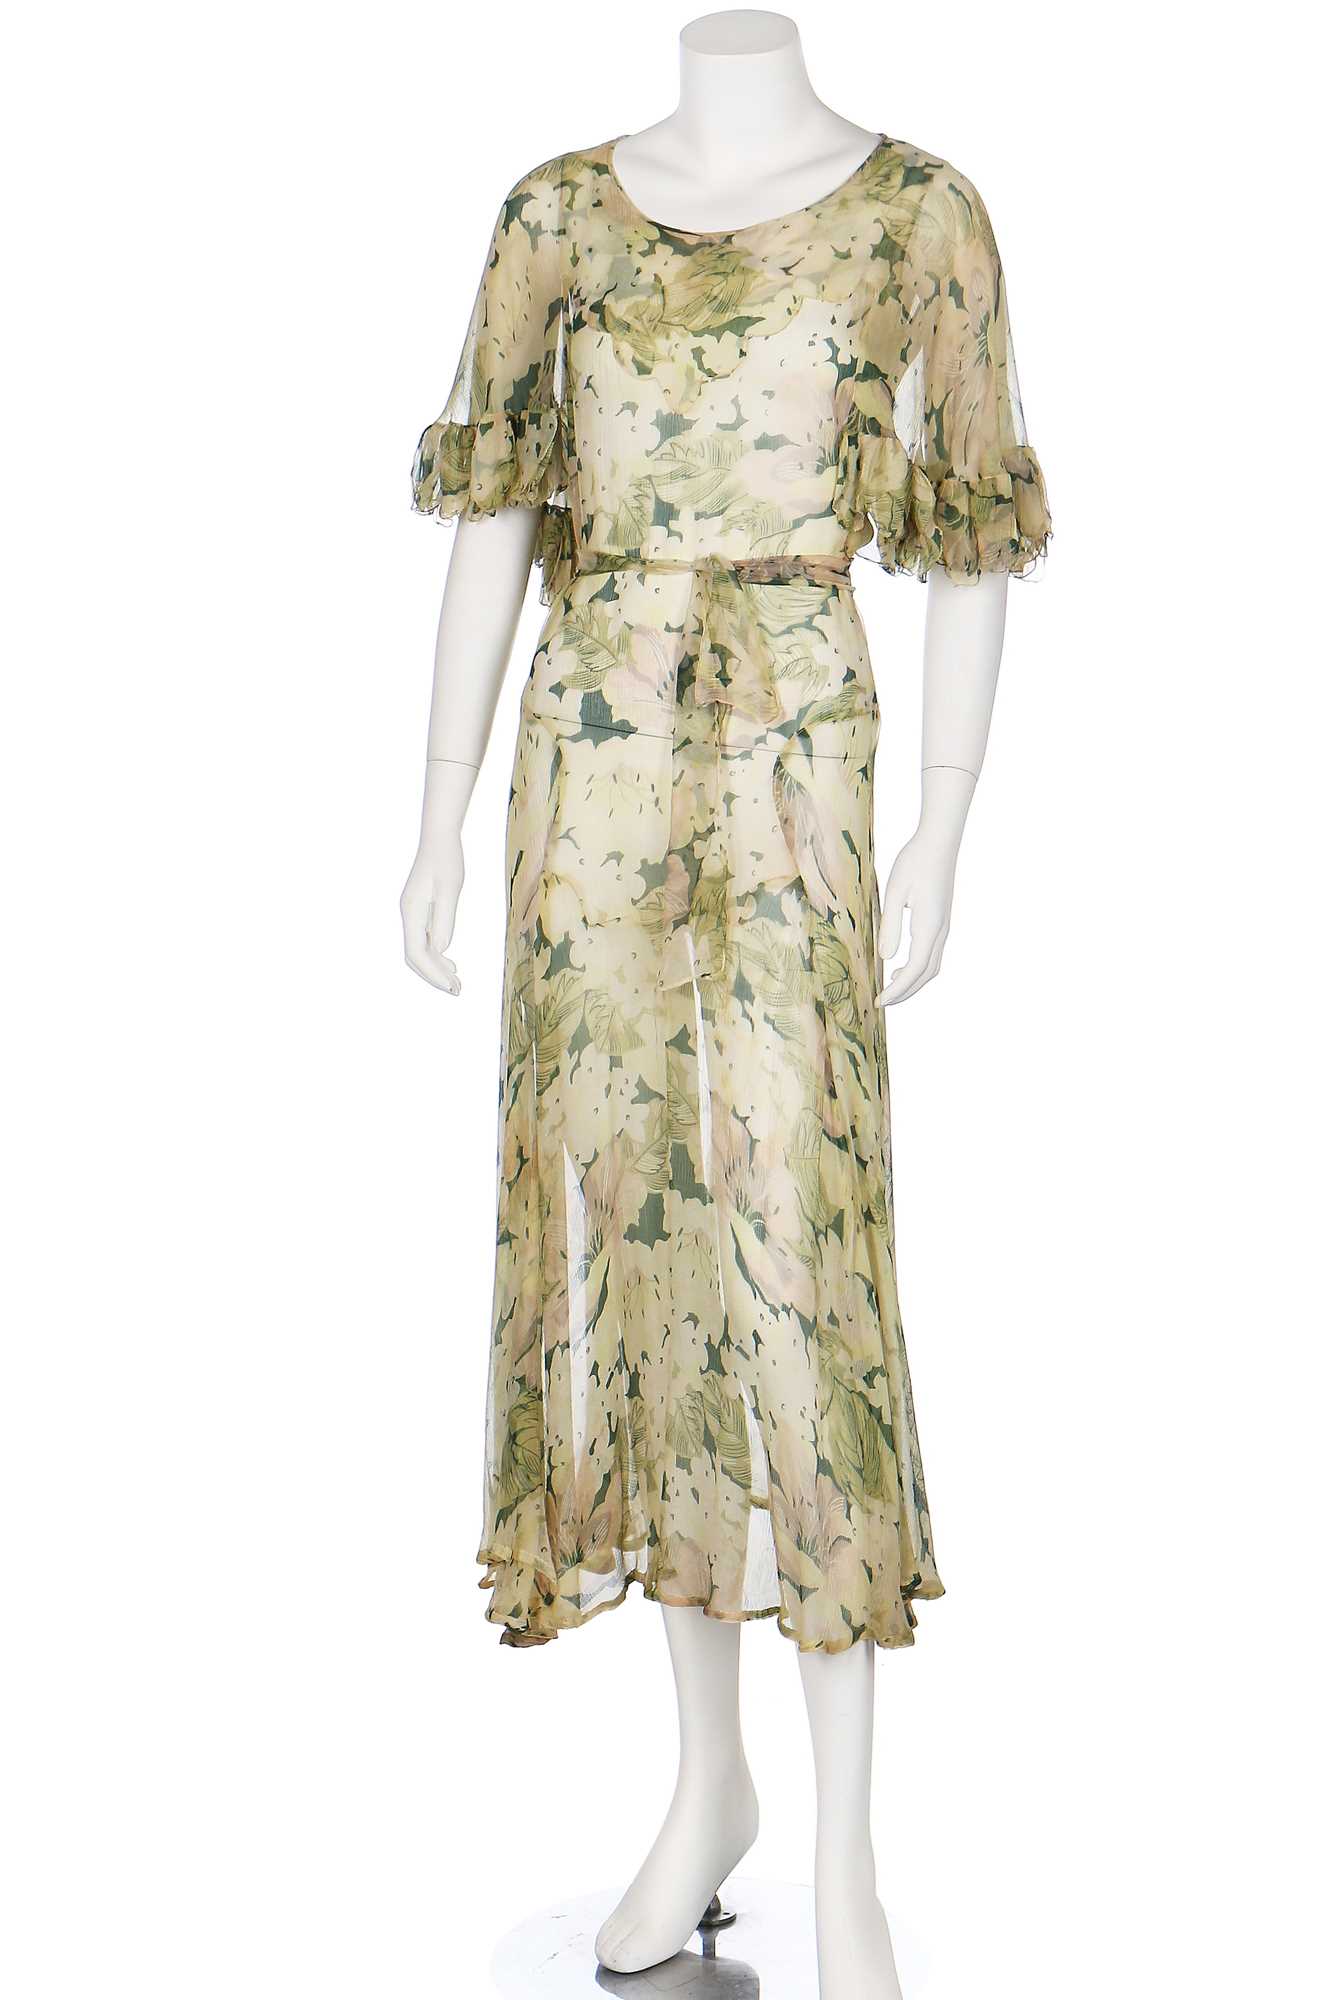 Lot 57 - Two bias-cut floral printed chiffon dresses in shades of green, 1930s